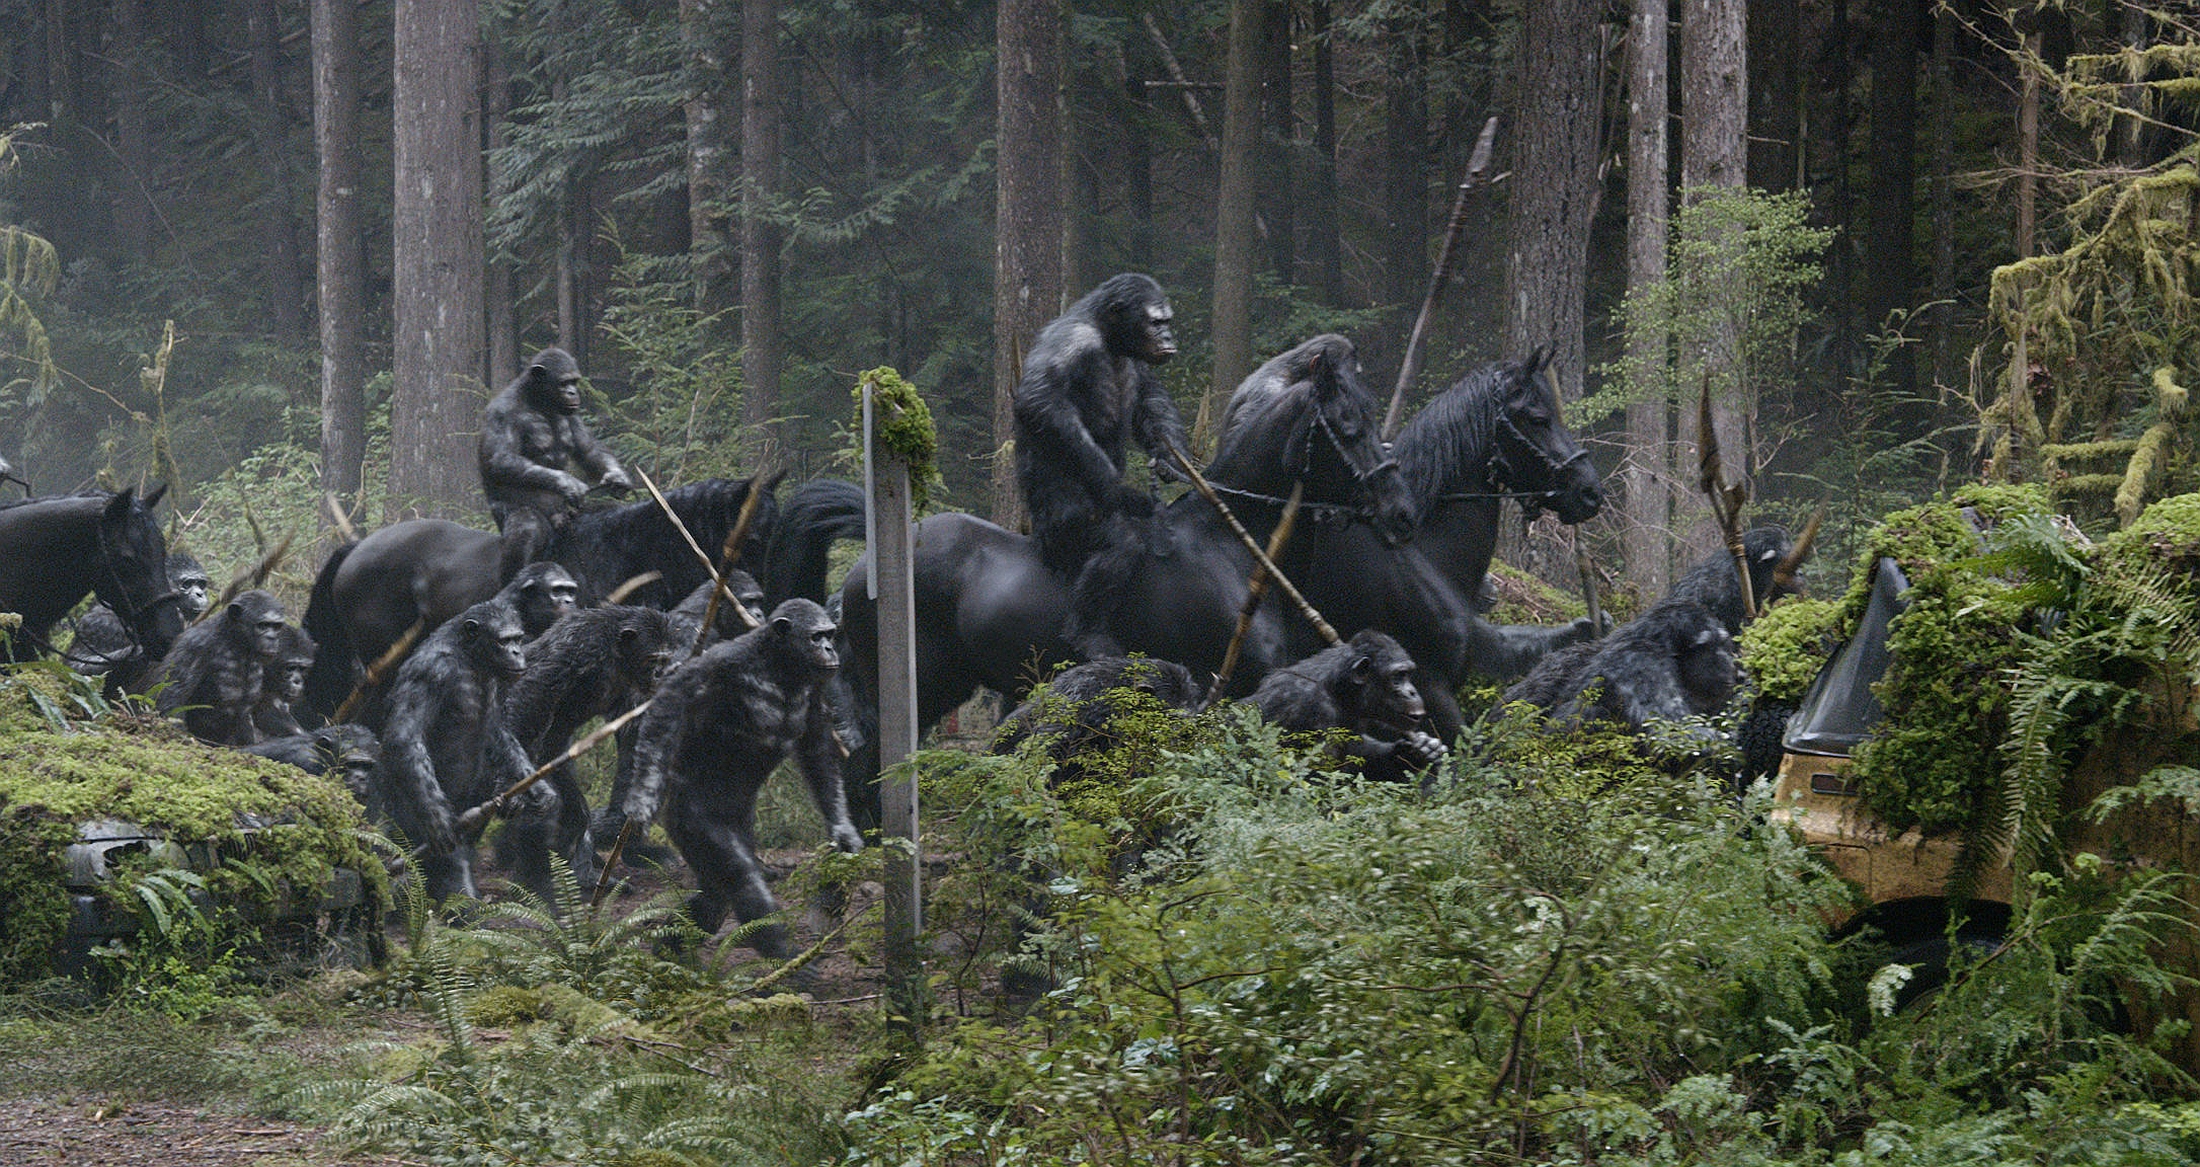 movie, dawn of the planet of the apes